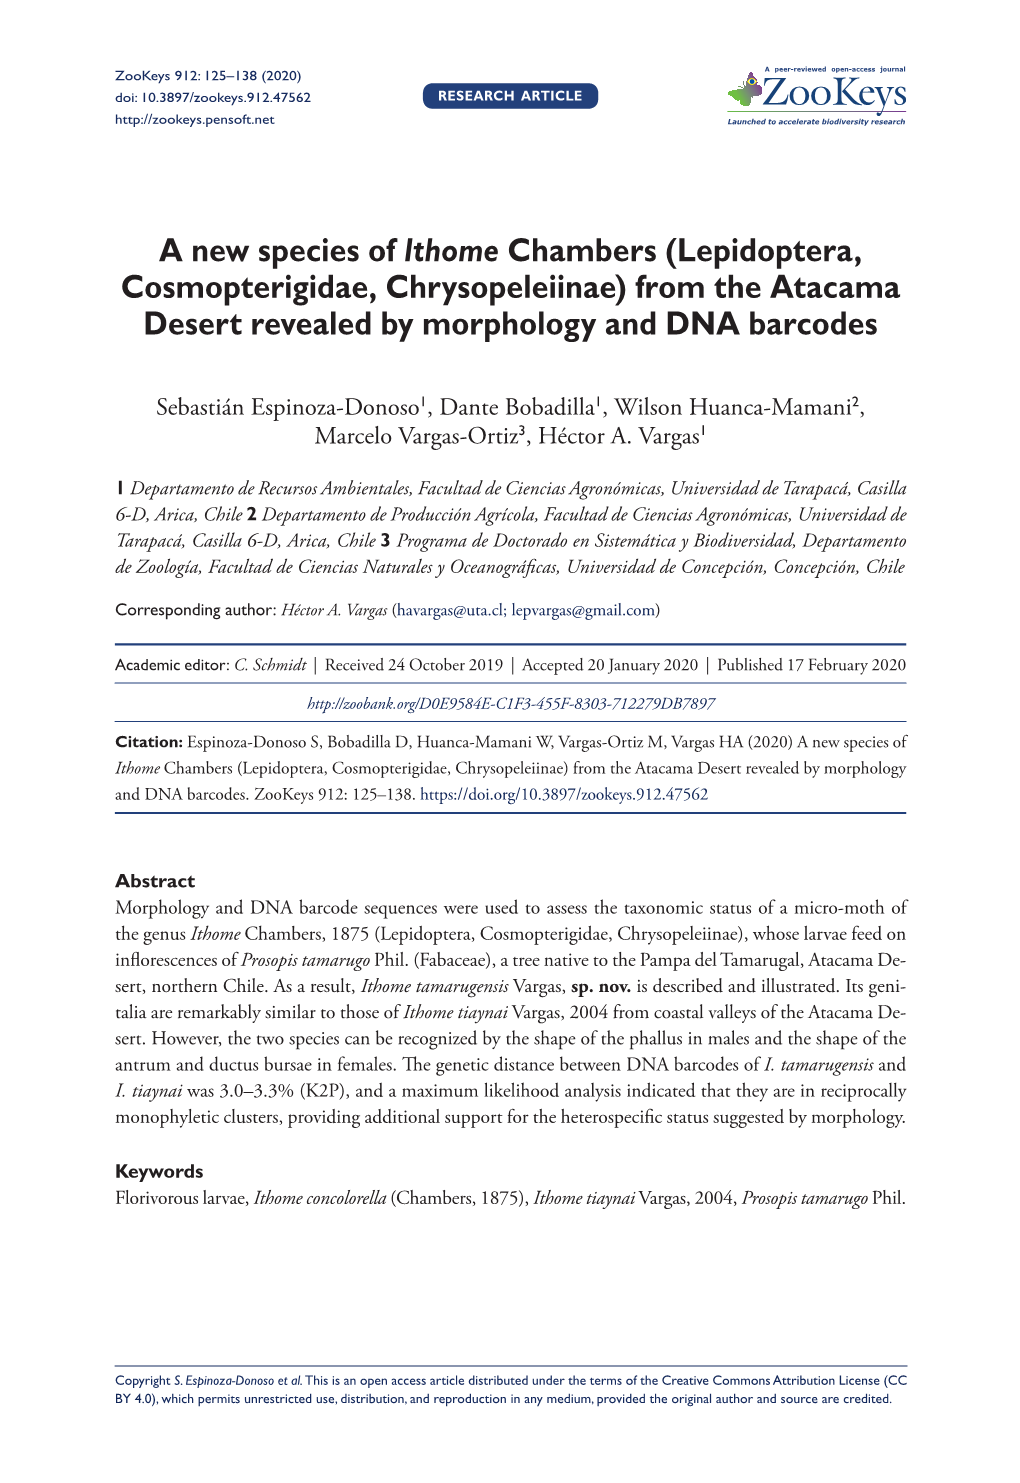 A New Species of Ithome Chambers (Lepidoptera, Cosmopterigidae, Chrysopeleiinae) from the Atacama Desert Revealed by Morphology and DNA Barcodes